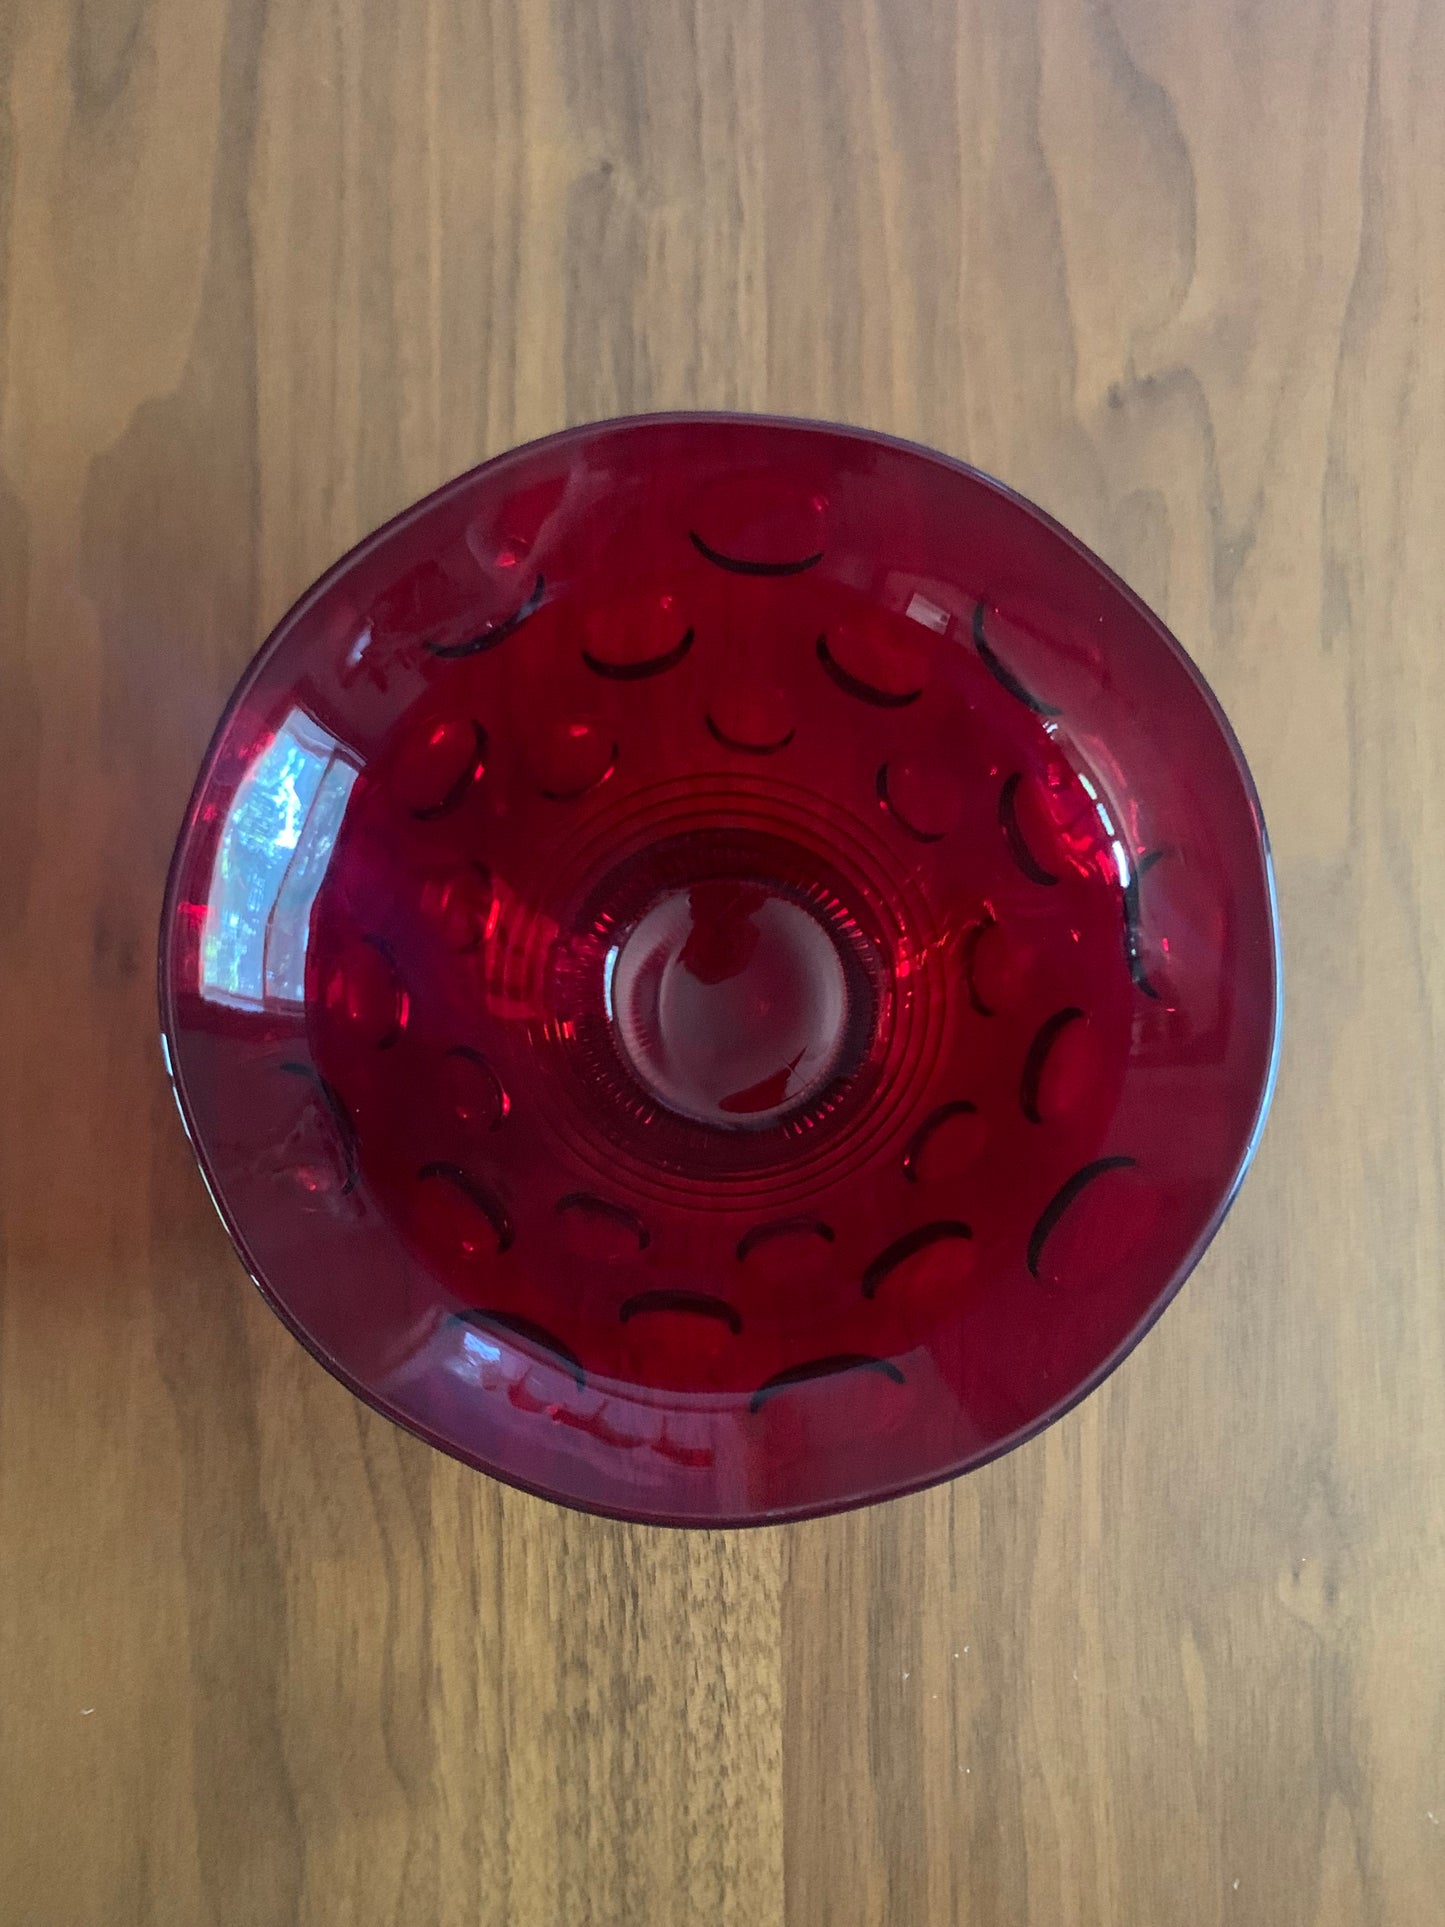 Imperial Glass Ruby Red Bowl on Pedestal